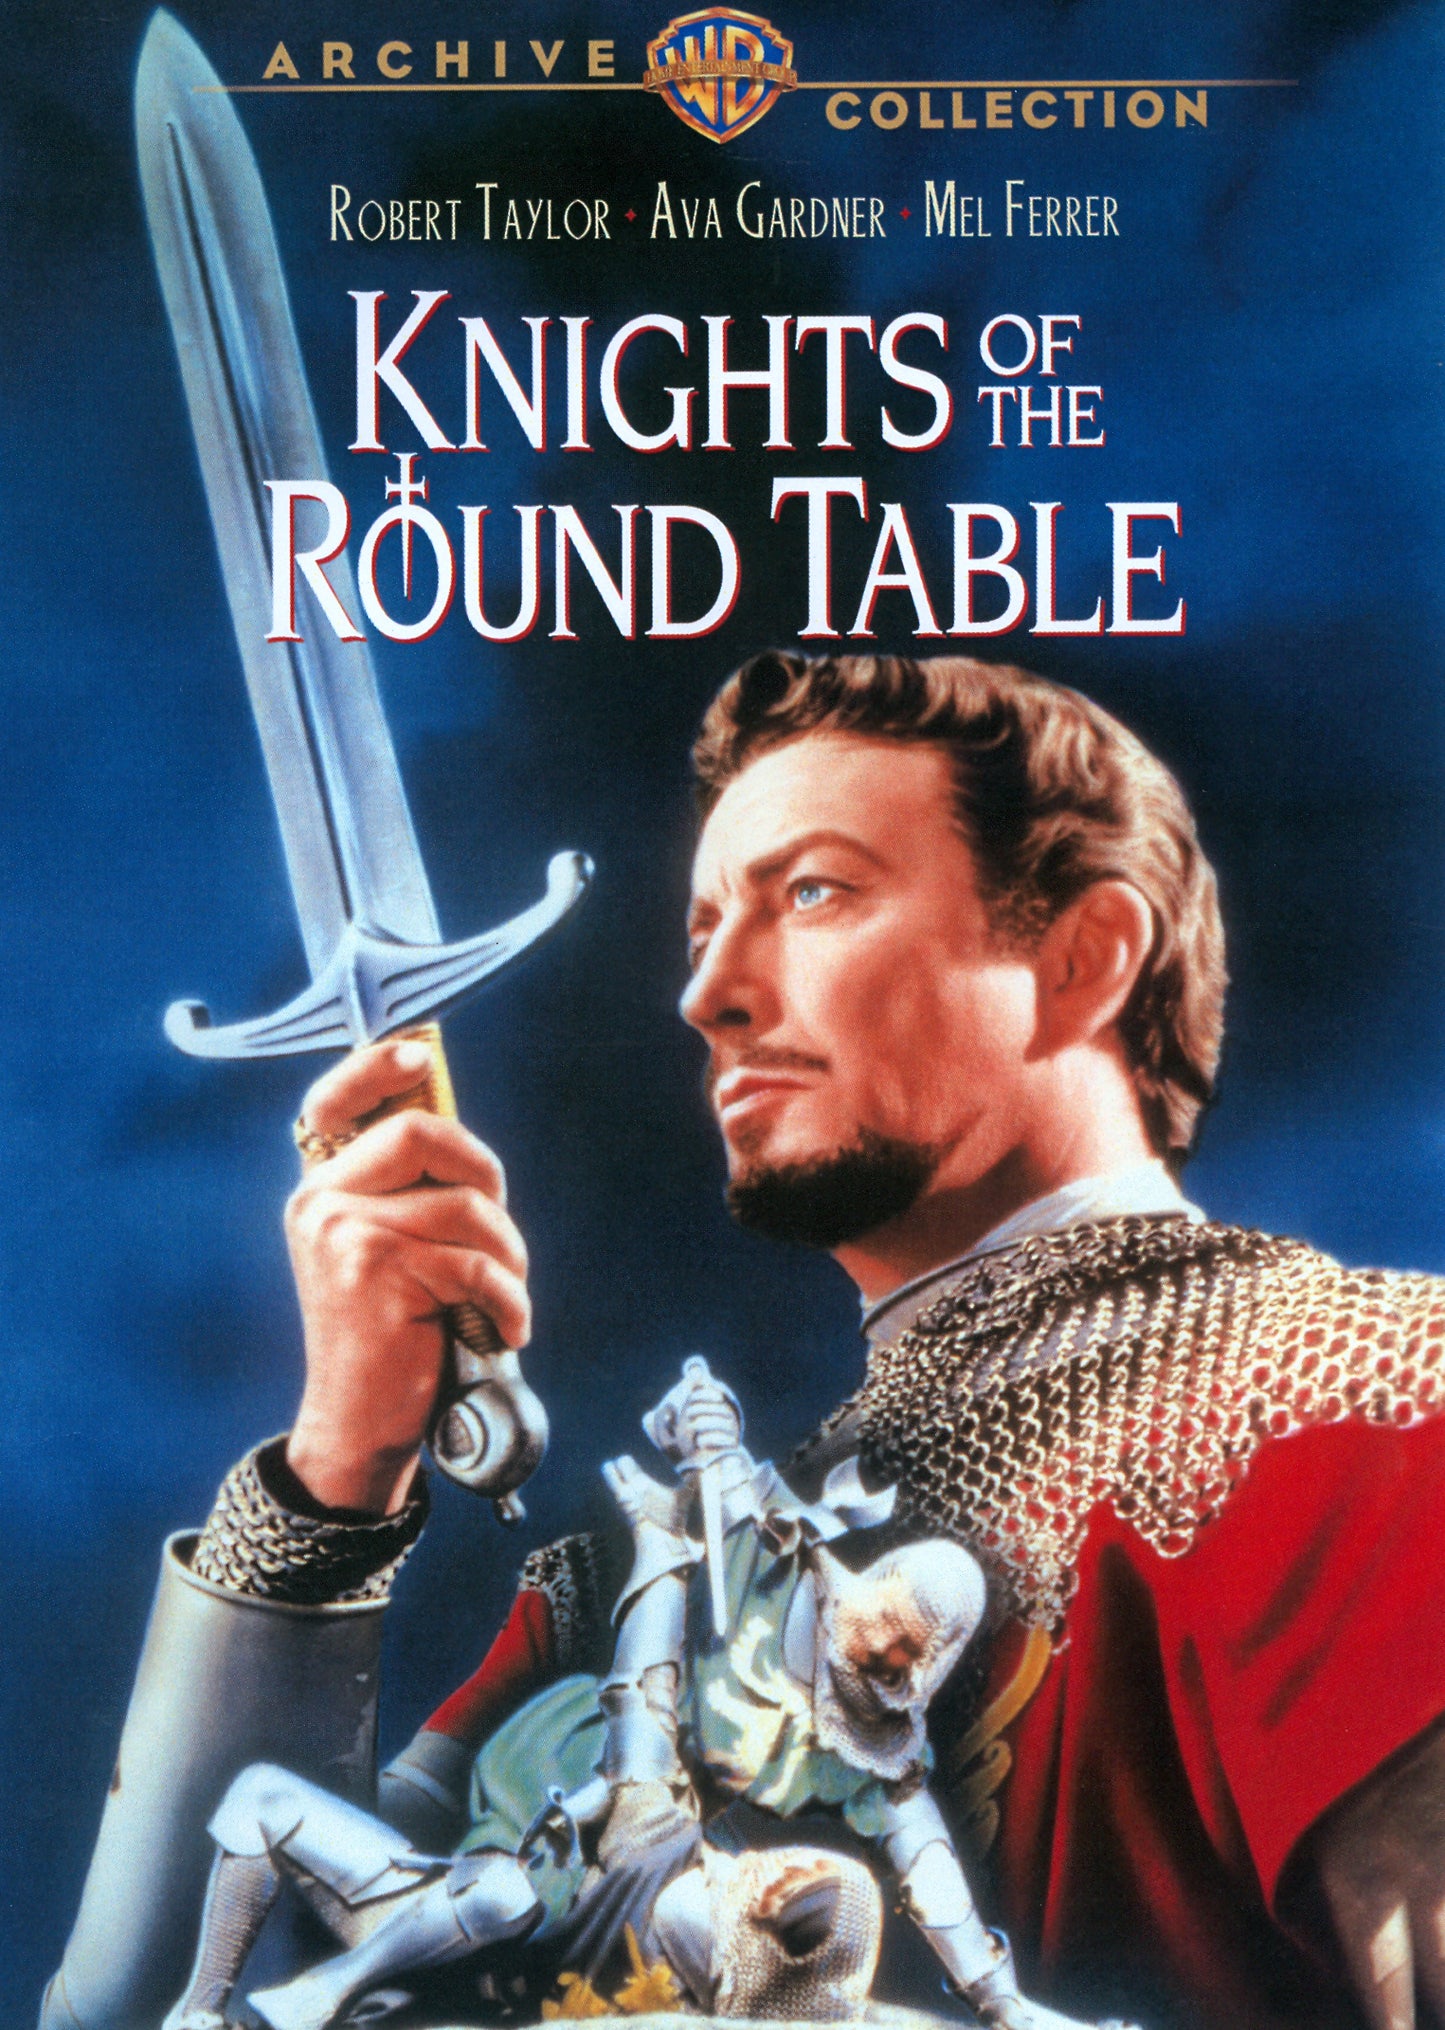 Knights of the Round Table cover art